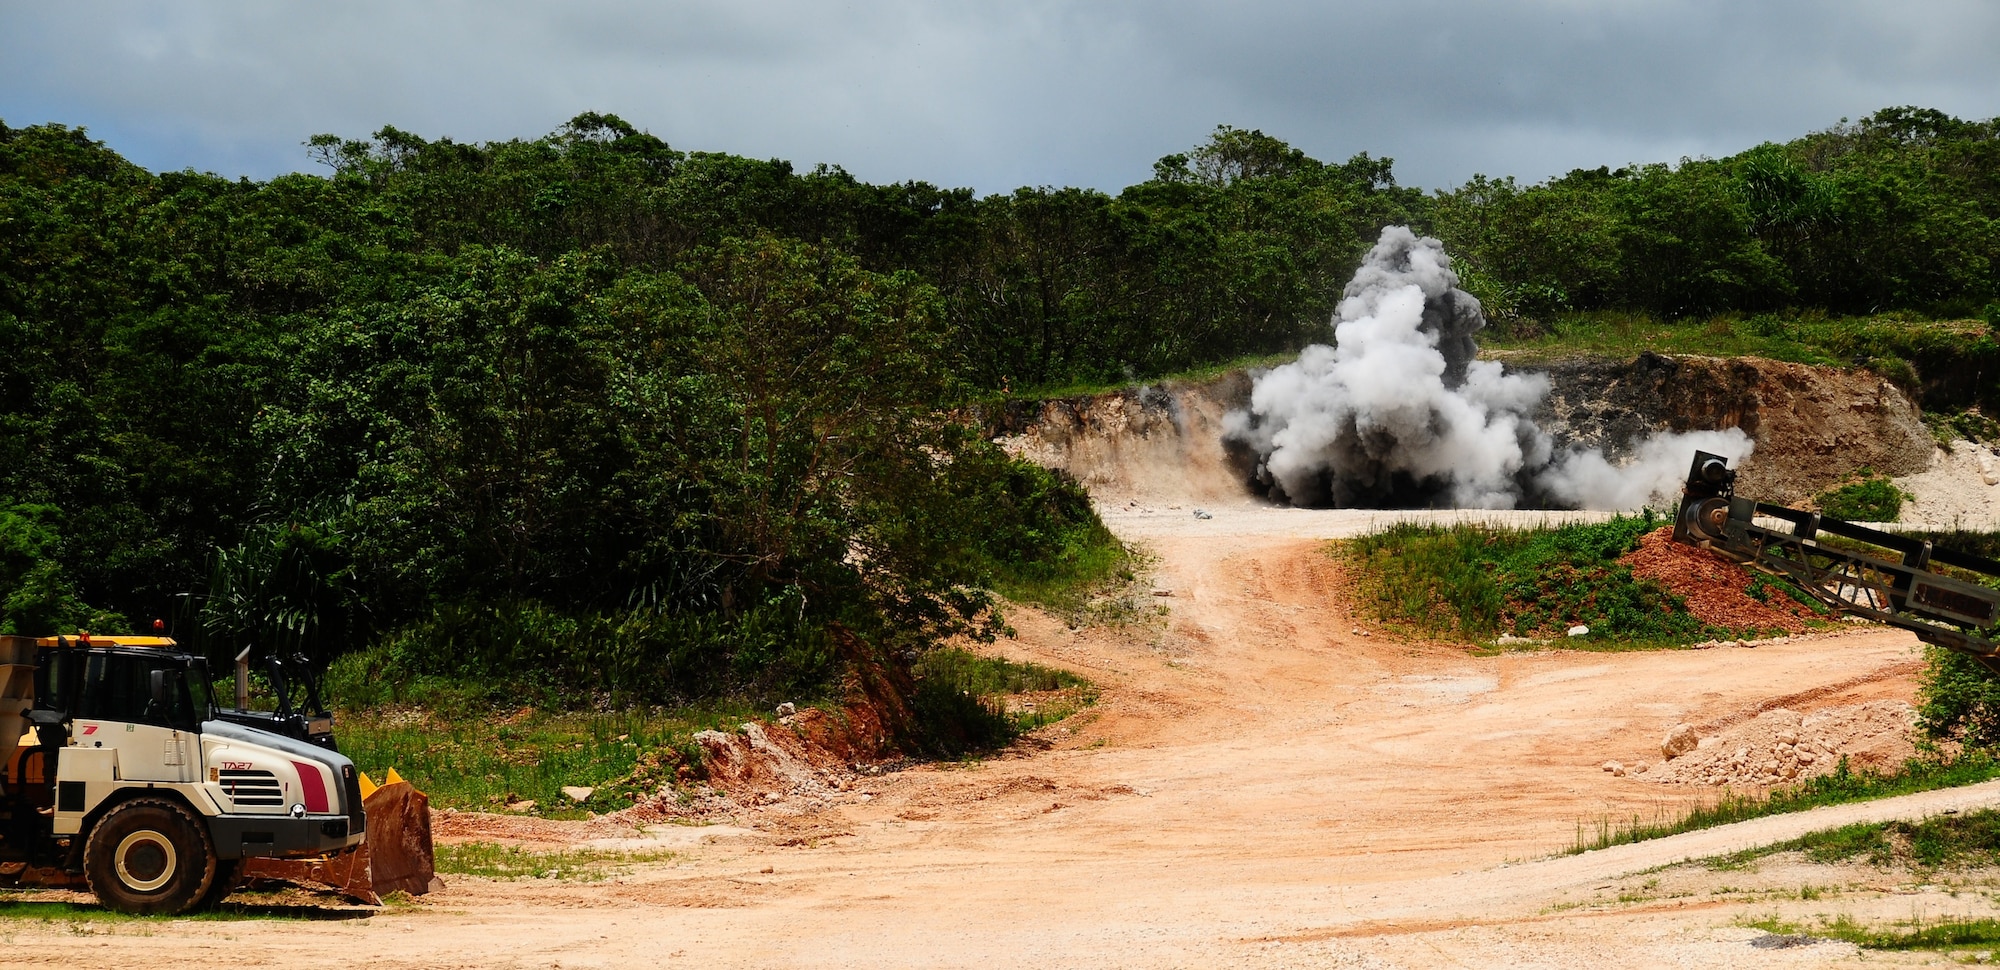 A loud boom fills the quarry as three explosives were detonated simultaneously at the RED HORSE quarry, June 6. The 554th RED HORSE Squadron explosive demolition team blasts once a month to stay qualified and at least once a quarter to obtain raw material from the quarry. (U.S. Air Force photo by Airman 1st Class Marianique Santos/Released)